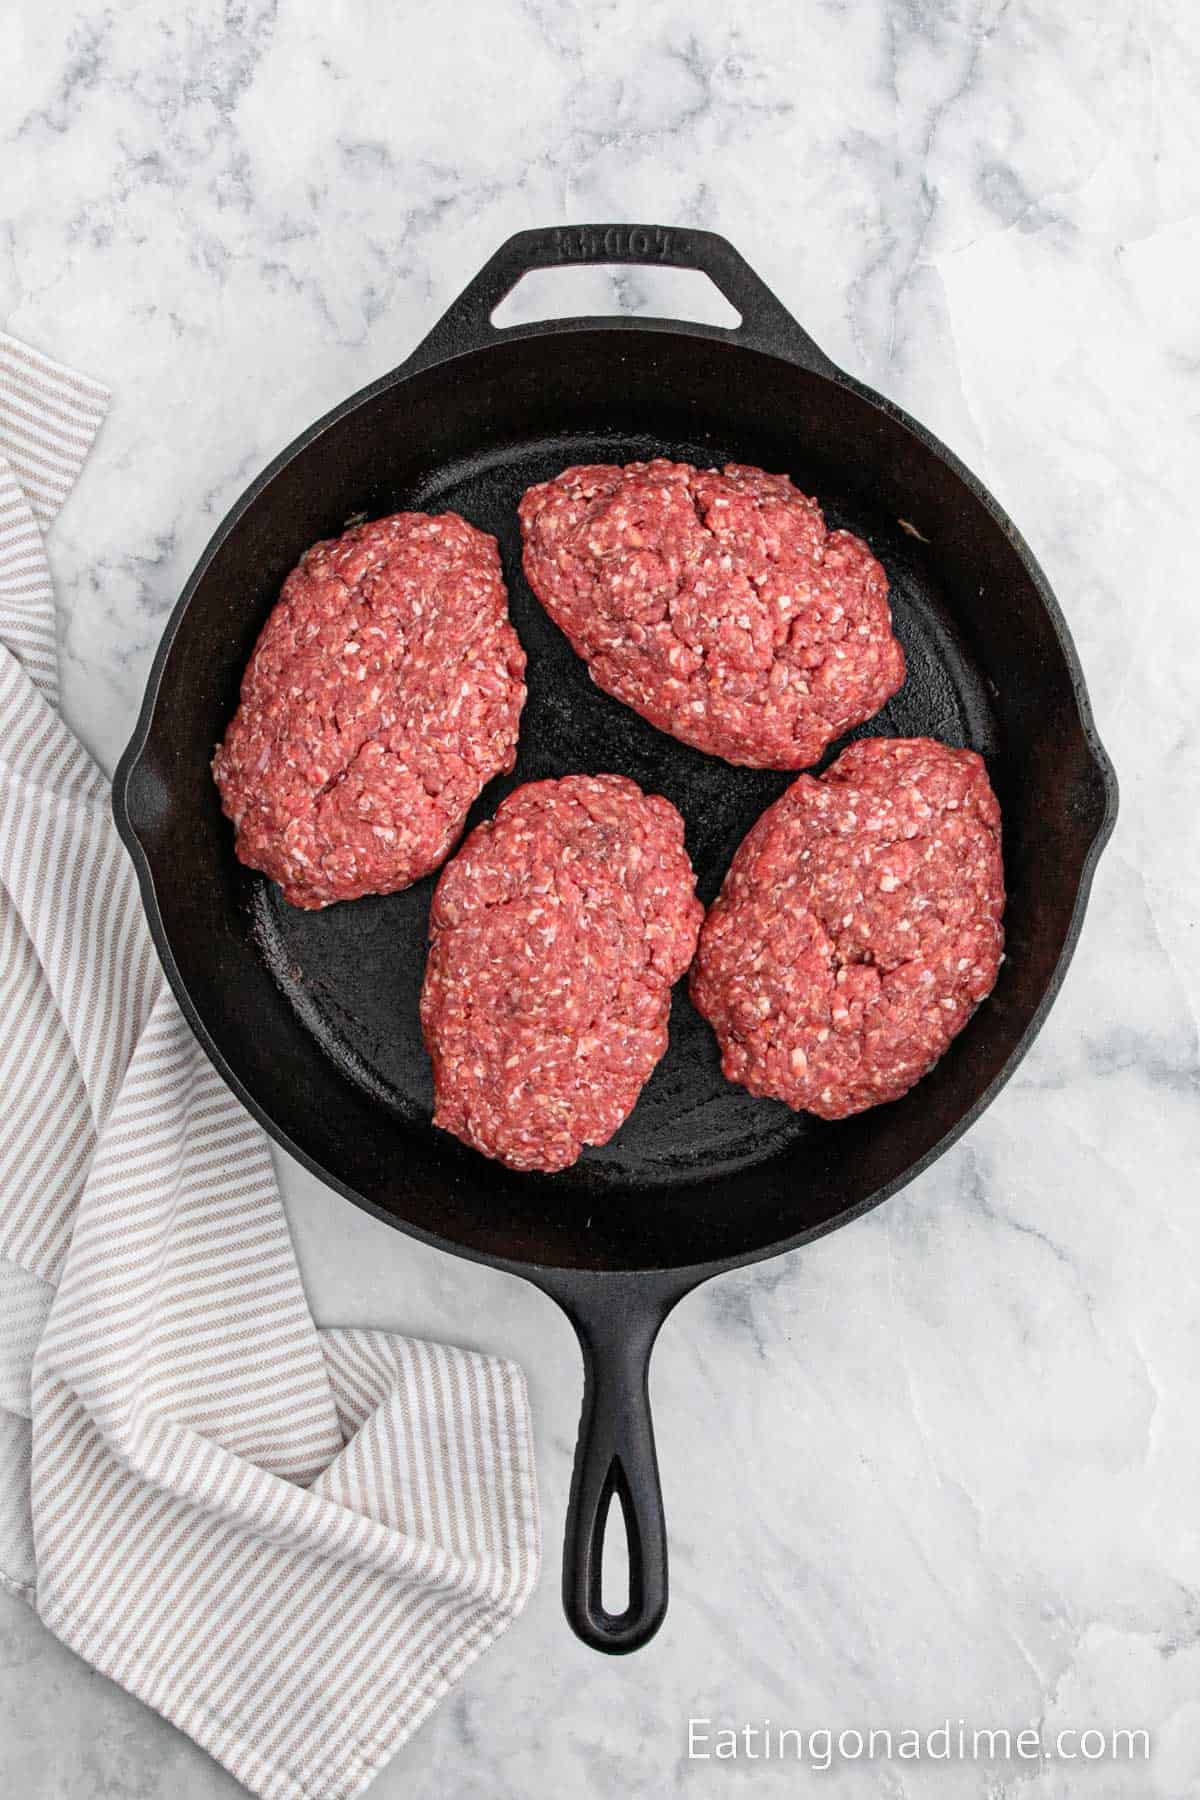 Cooking burgers in a cast iron skillet